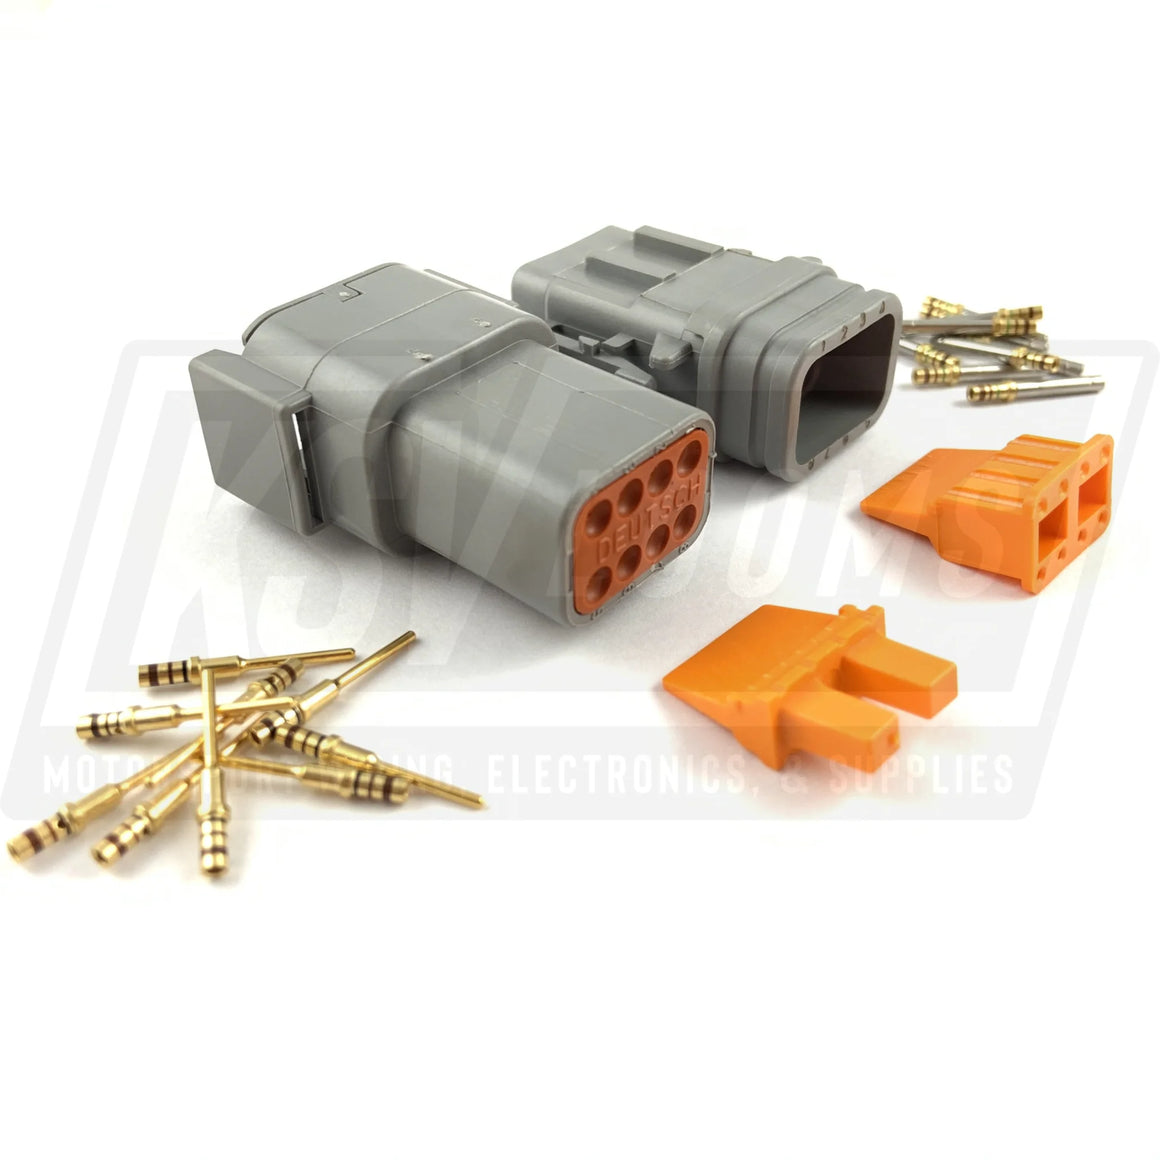 Mated Deutsch Dtm 8-Way Connector Plug Kit (24-20 Awg)